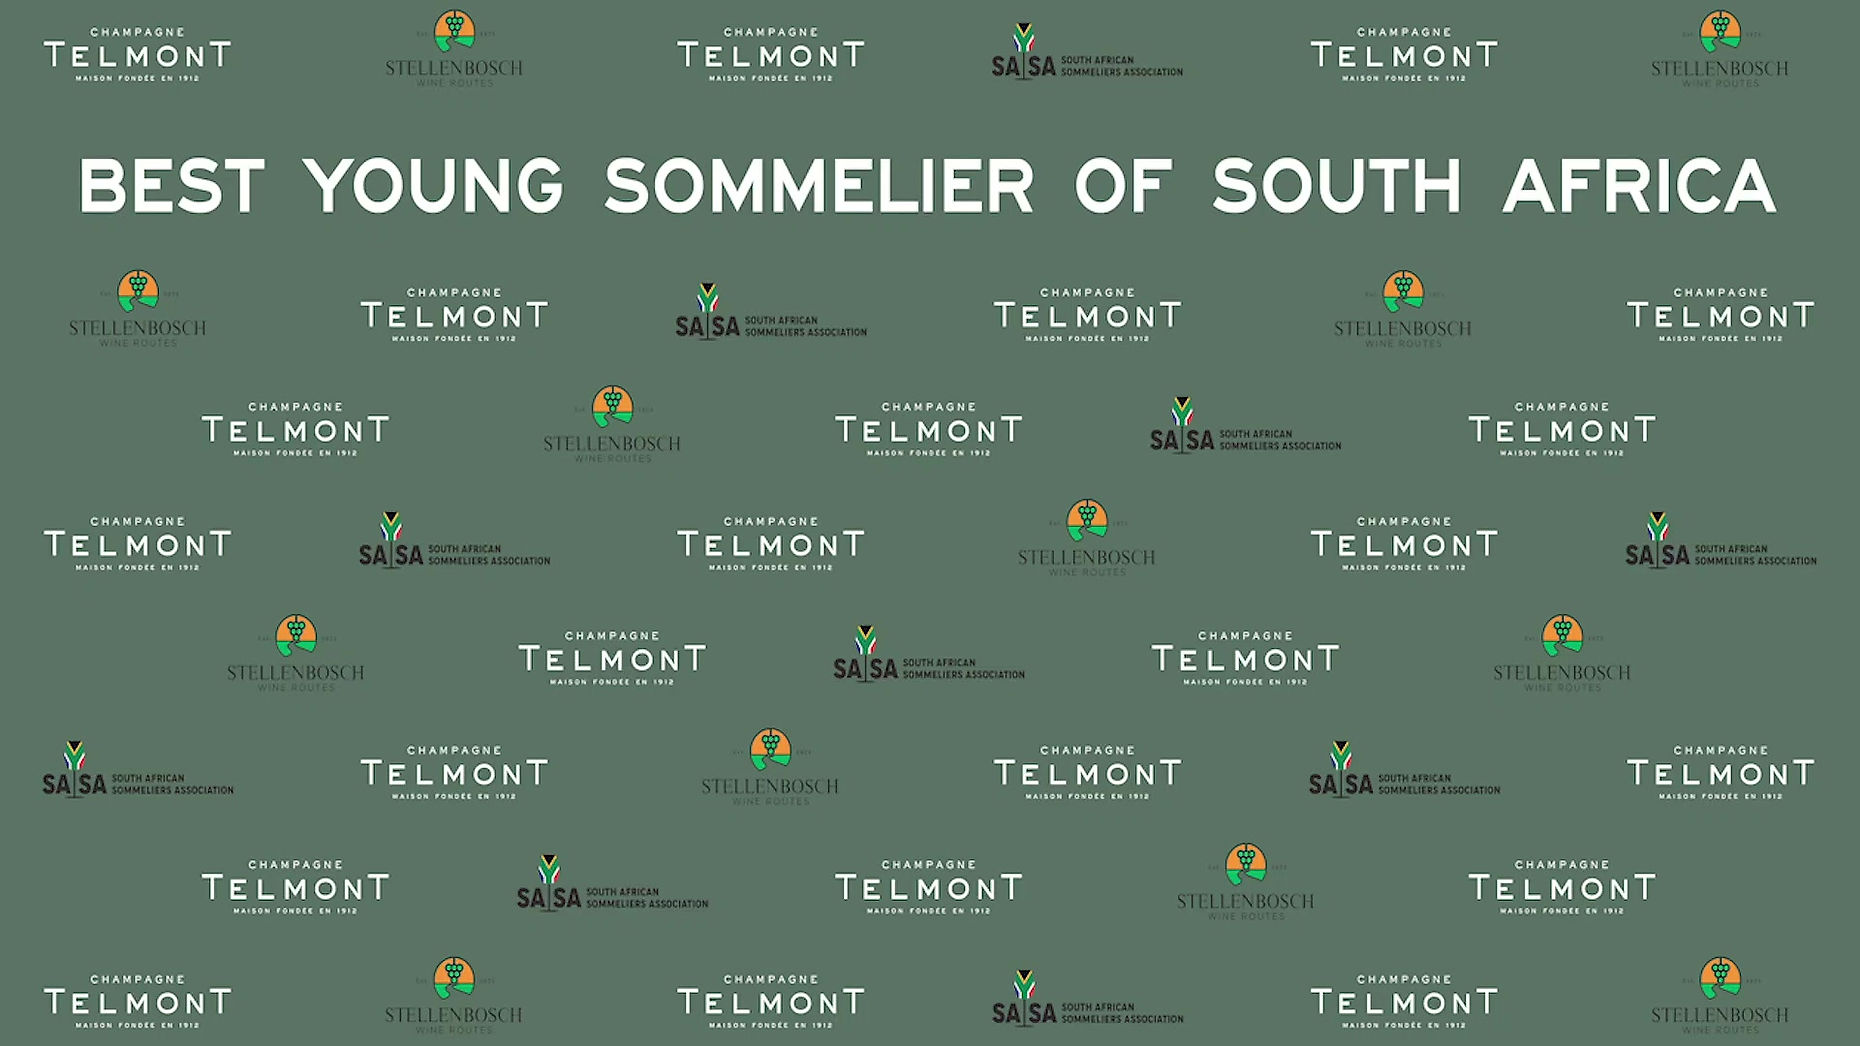 Champagne Telmont Best Young Sommelier Competition 2022